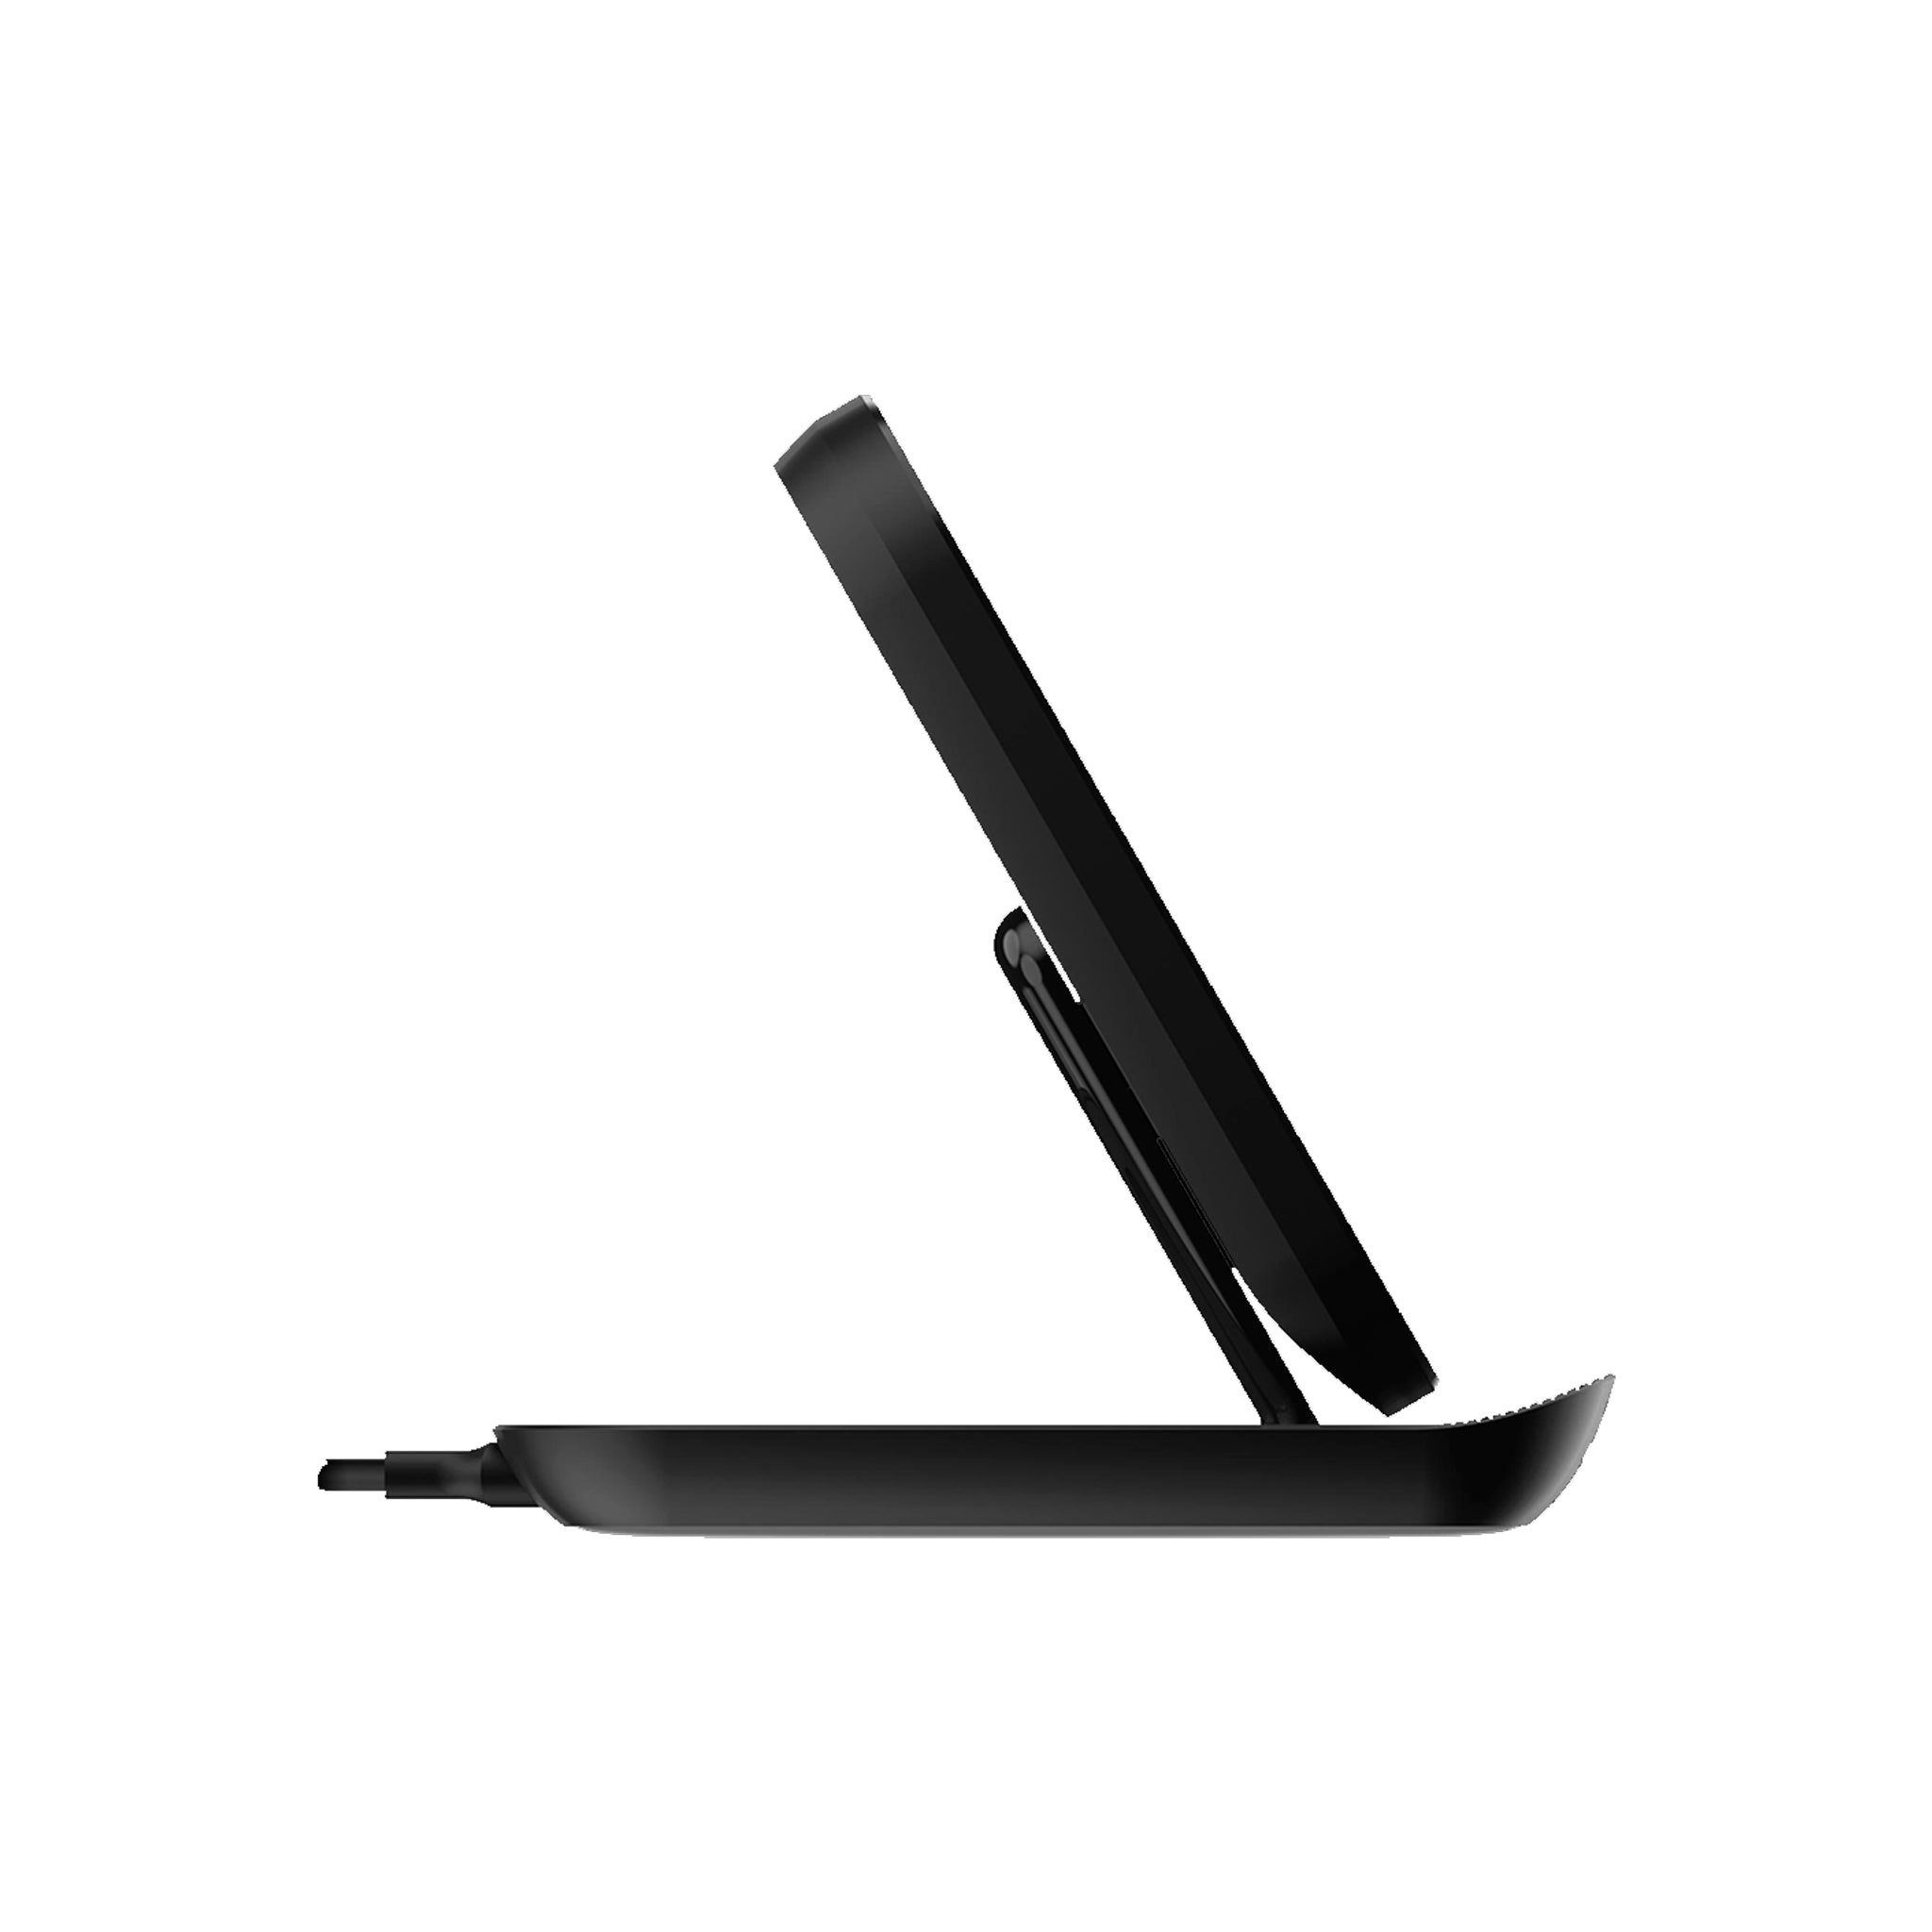 Mophie - Universal Wireless Charging Stand - Black